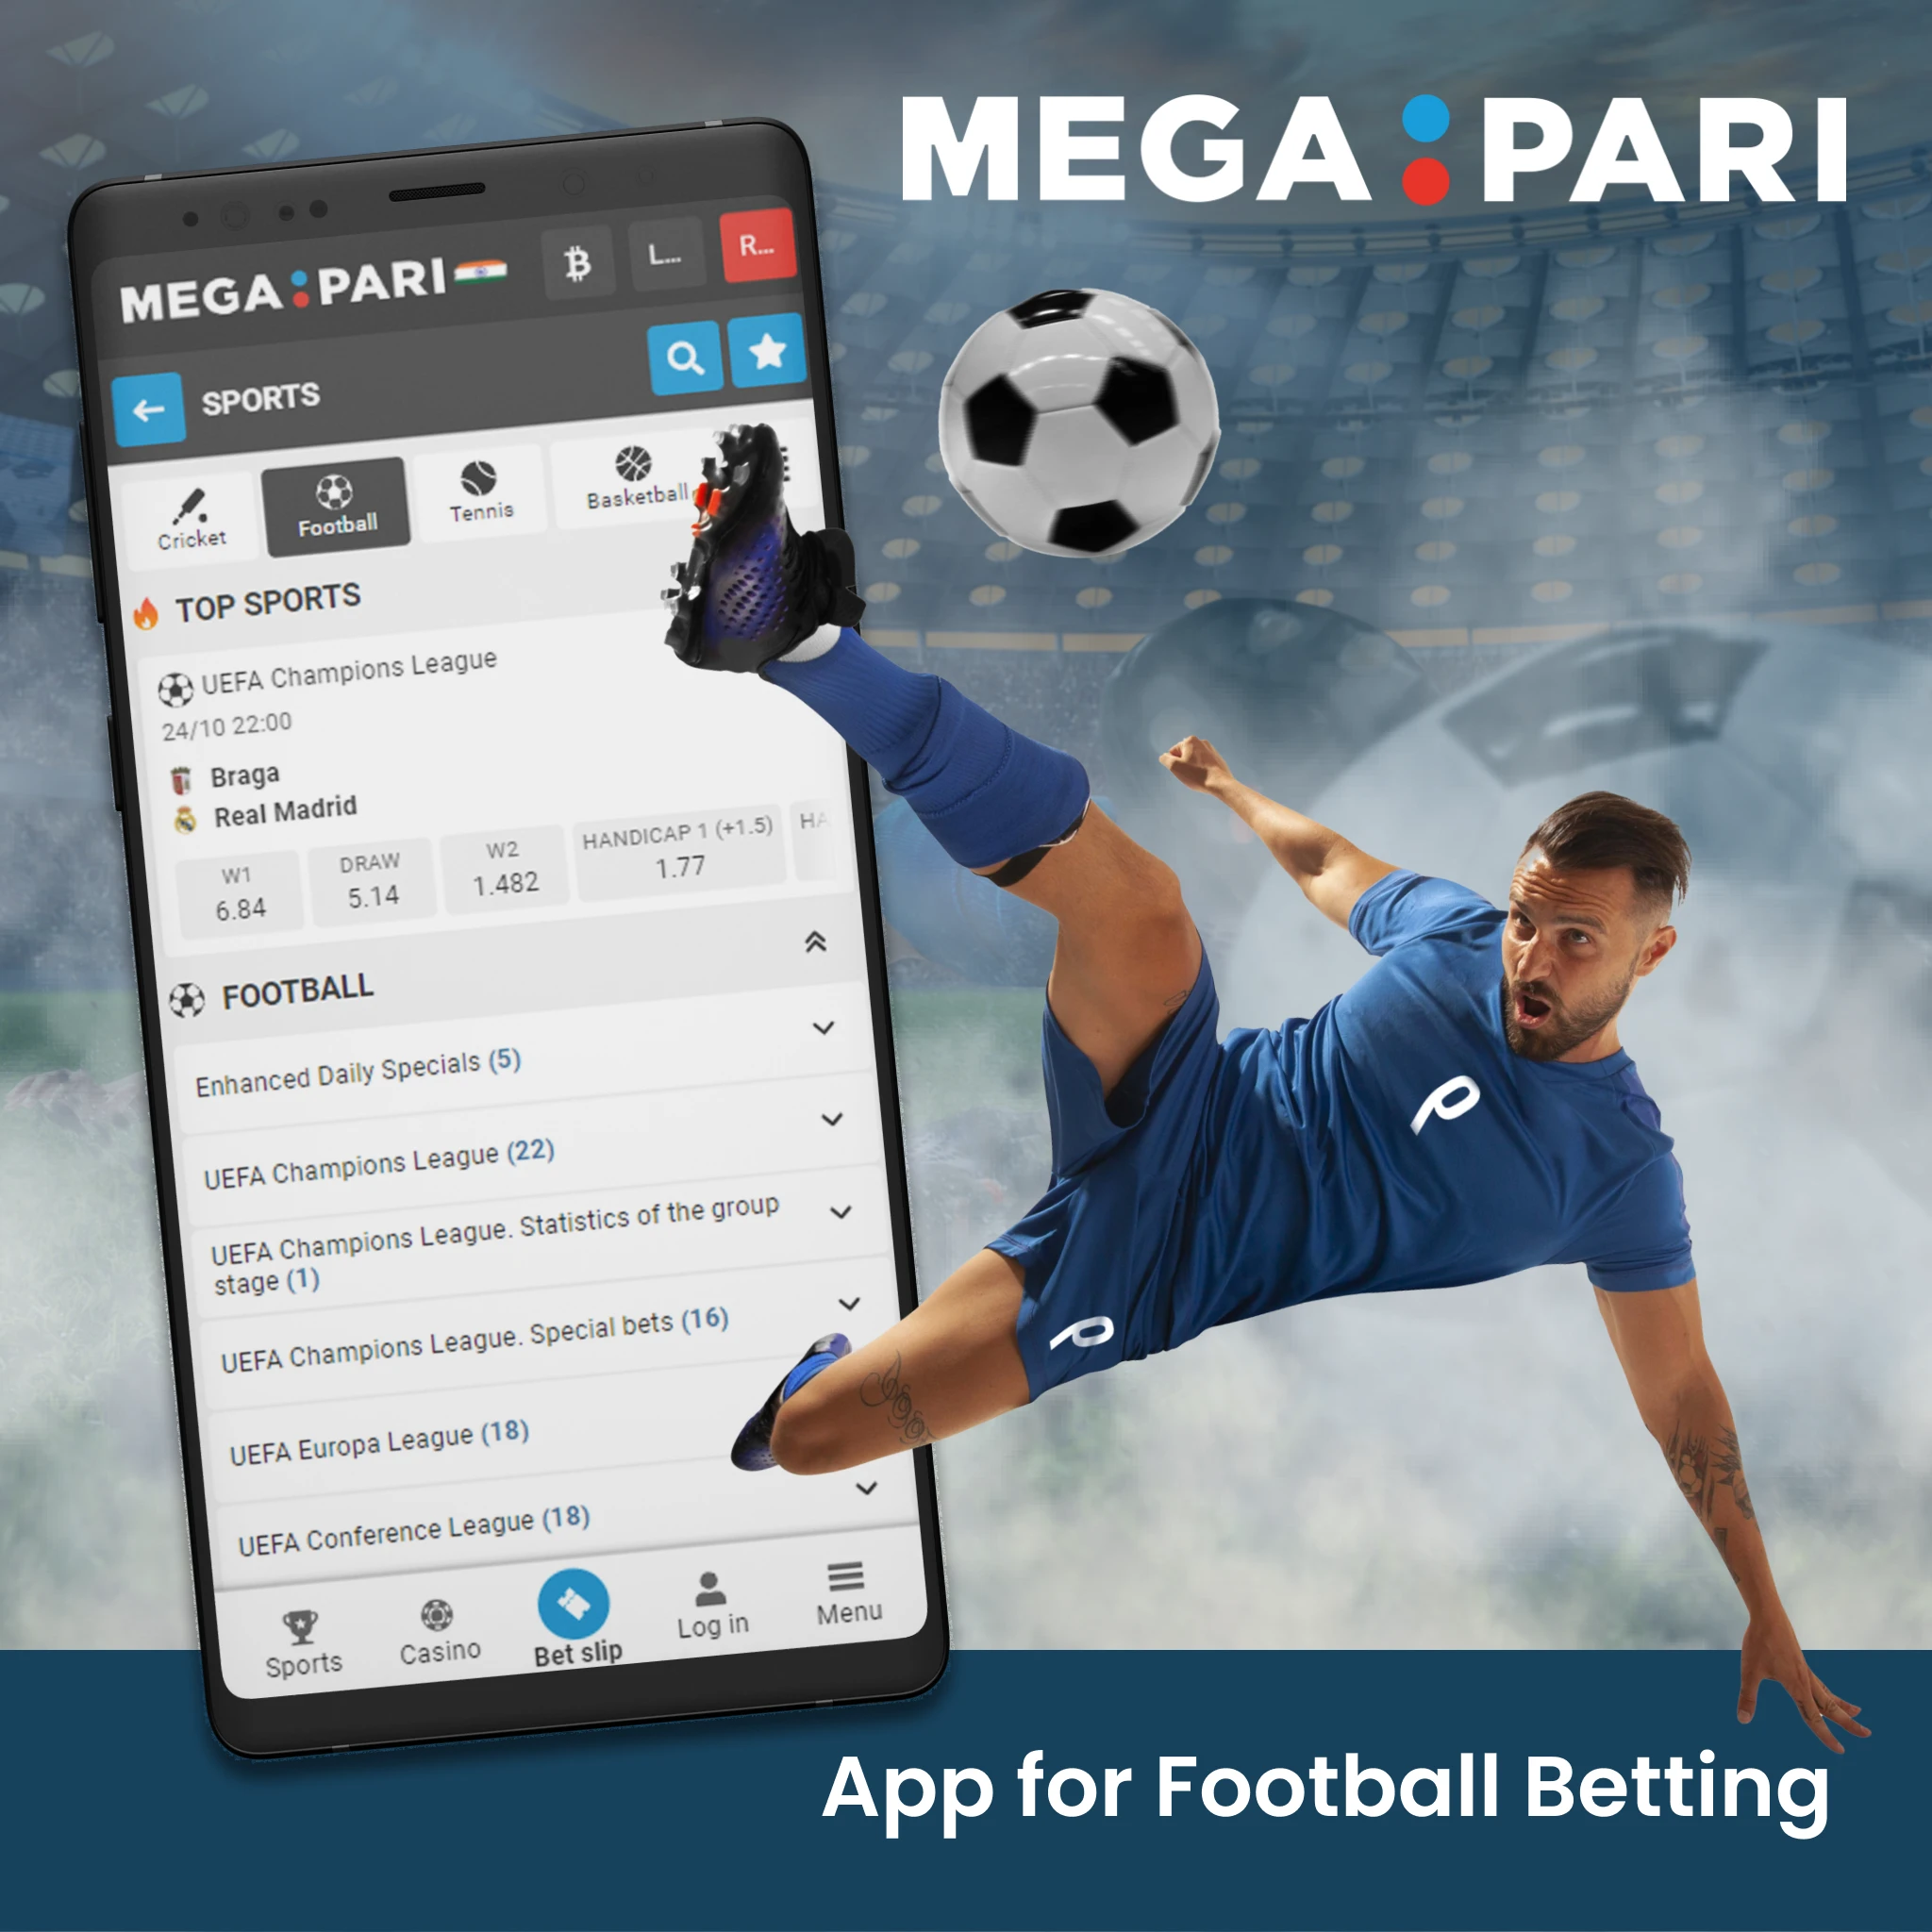 The Megapari app consists of users worldwide, showing a broad range of betting options while ensuring every interaction remains smooth and enjoyable.